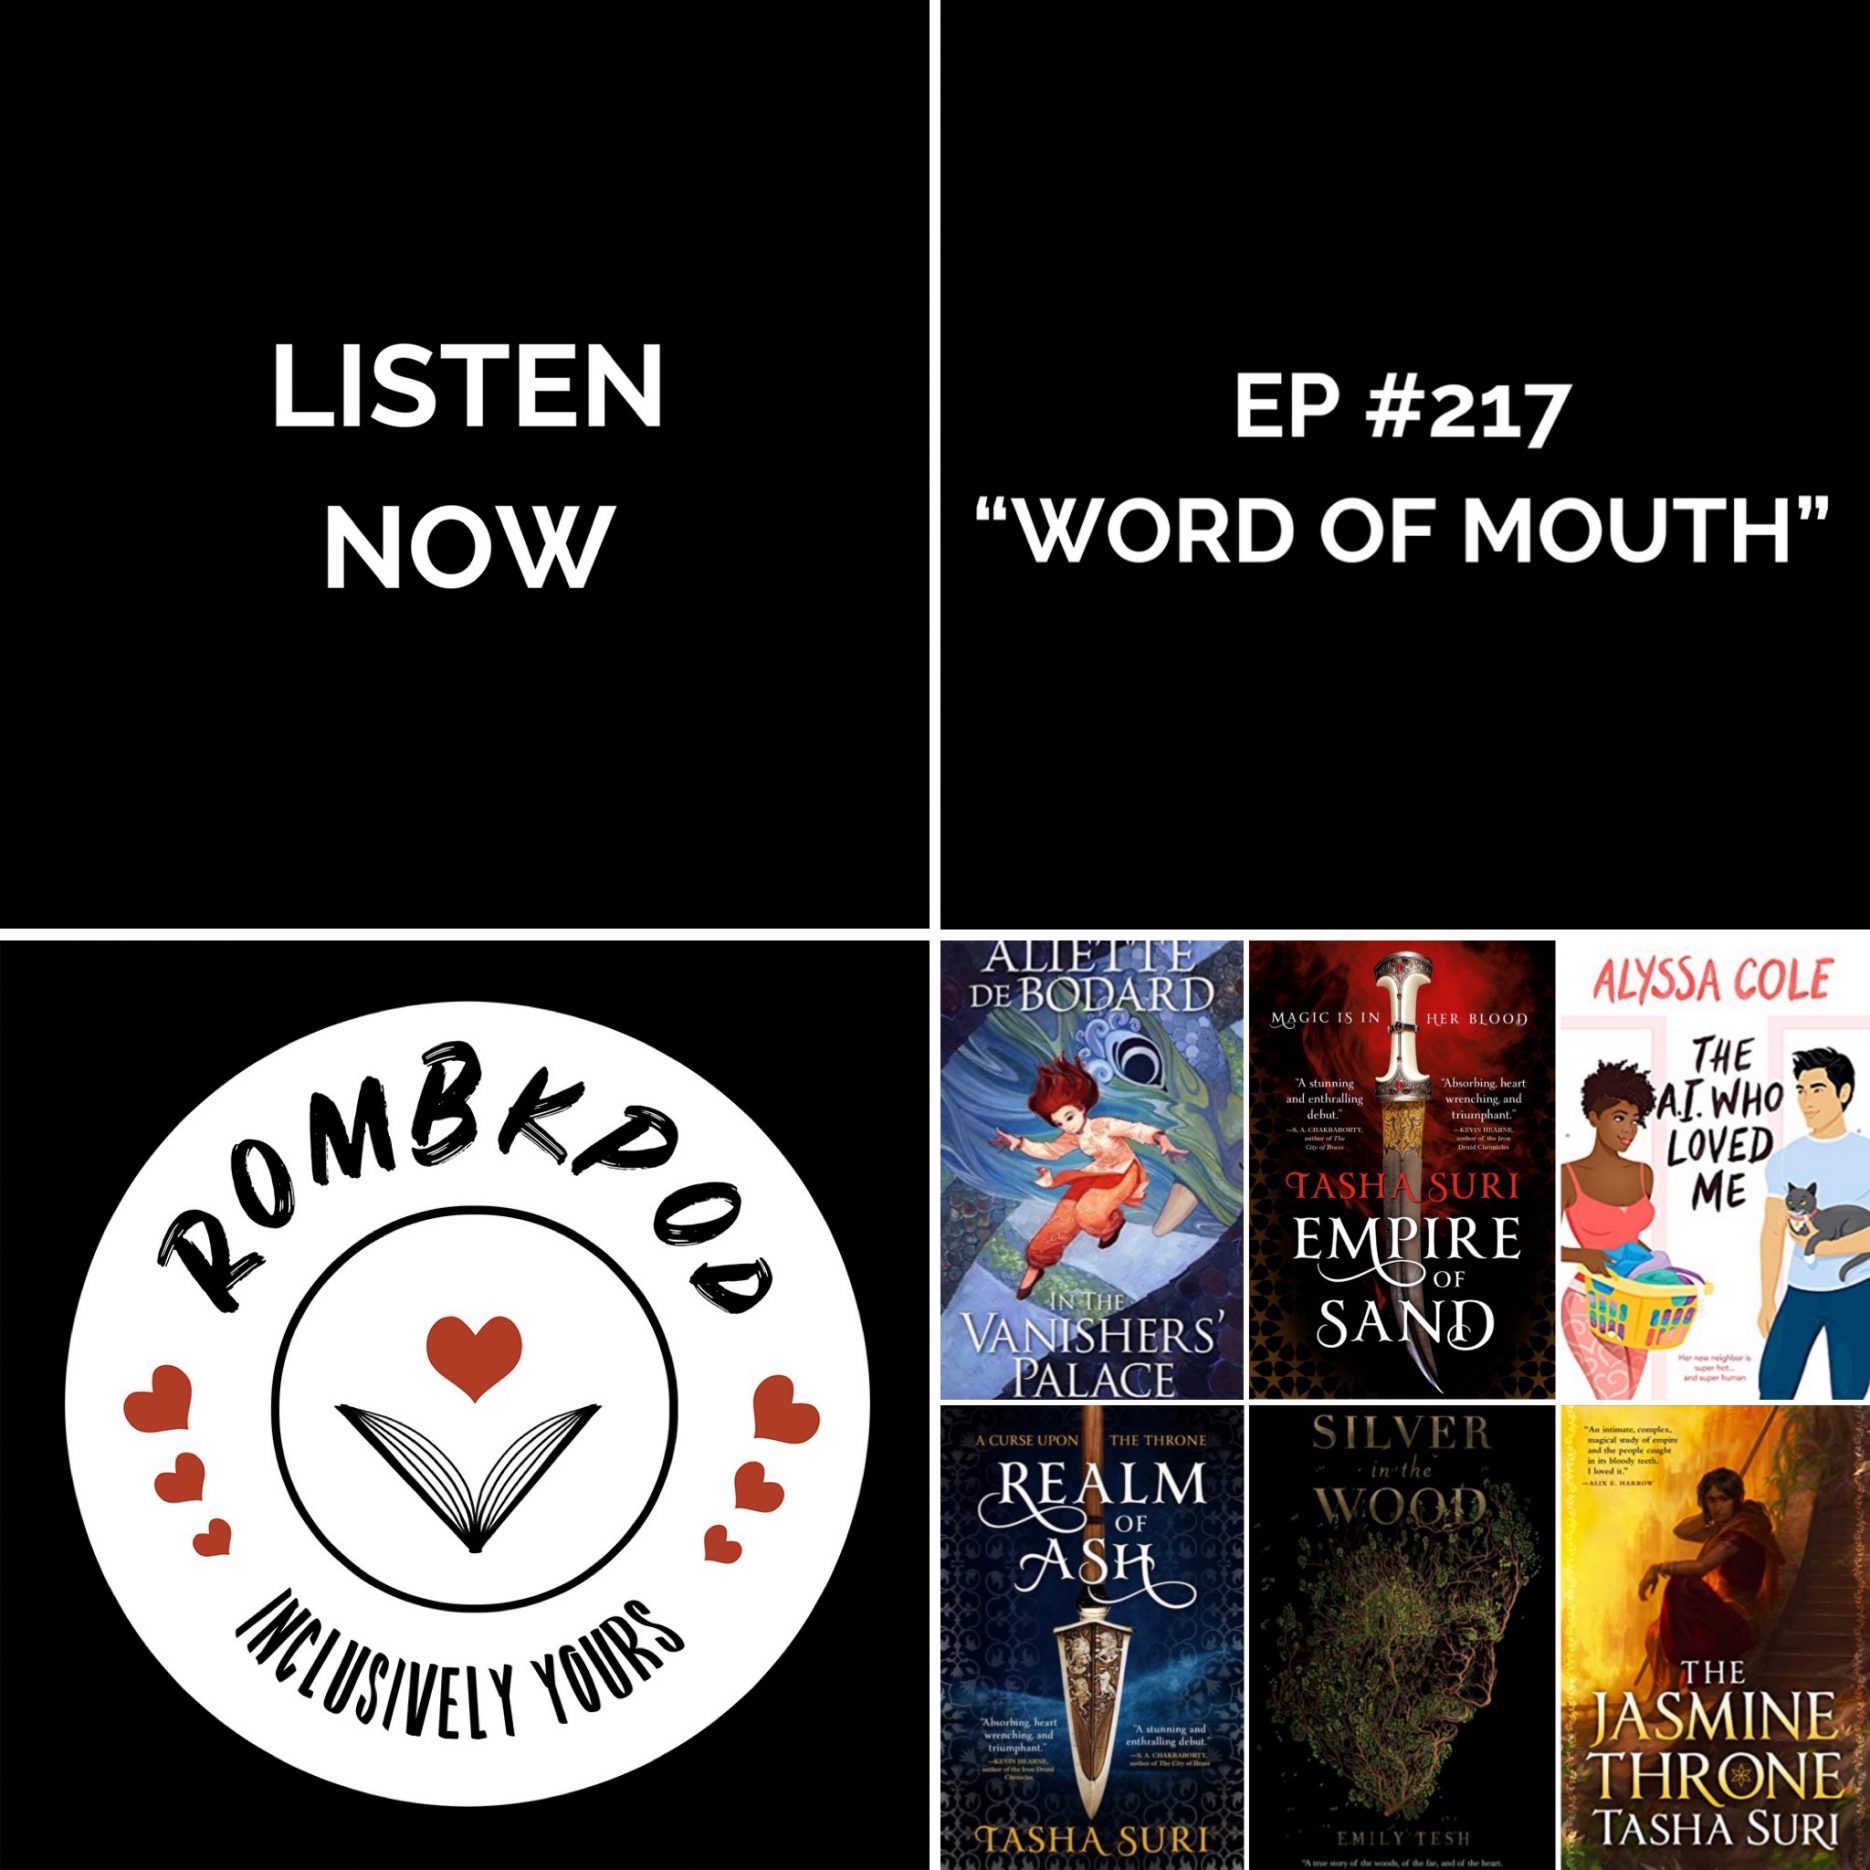 IMAGE: lower left corner, RomBkPod heart logo; lower right corner, ep #217 book cover collage; IMAGE TEXT: Listen Now, ep #217 "Word of Mouth"